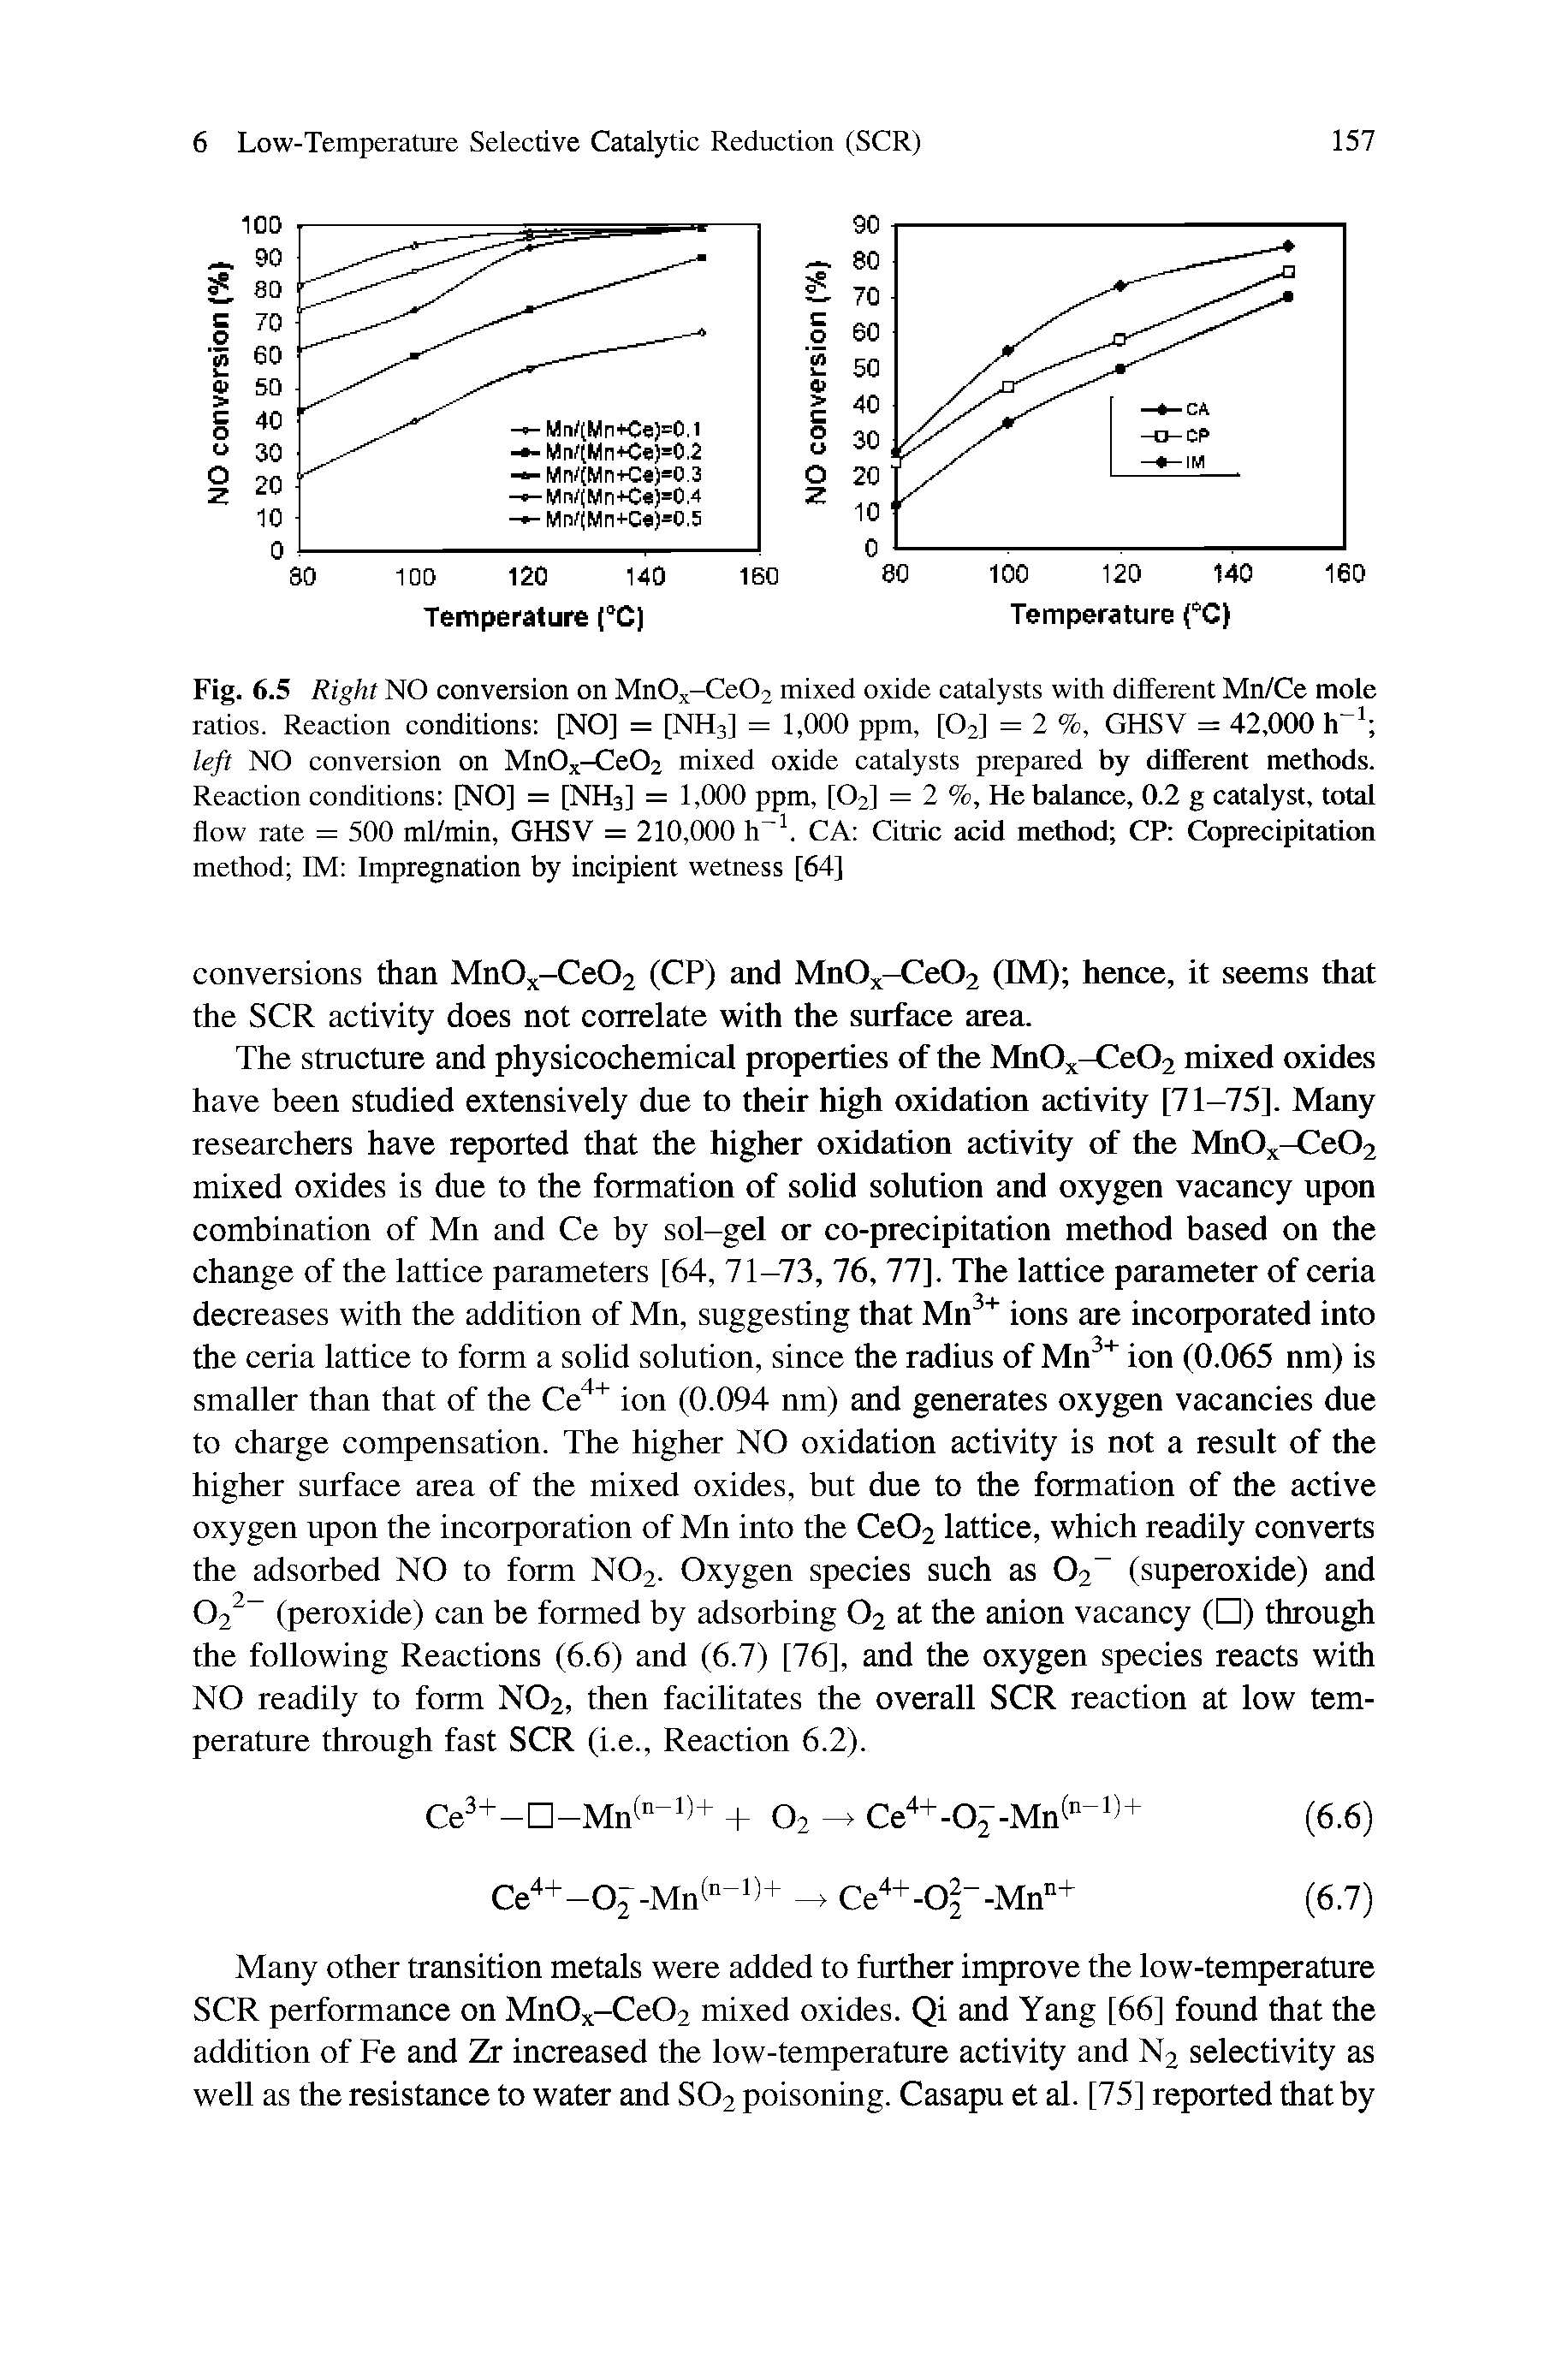 Fig. 6.5 Right NO conversion on Mn0x-Ce02 mixed oxide catalysts with different Mn/Ce mole ratios. Reaction conditions [NO] = [NH3] = 1,000 ppm, [O2] = 2 %, GHSV = 42,000 left NO conversion on MnOx-Ce02 mixed oxide catalysts prepared by different methods. Reaction conditions [NO] = [NH3] = 1,000 ppm, [O2] = 2 %, He balance, 0.2 g catalyst, total flow rate = 500 ml/min, GHSV = 210,000 h. CA Citric acid method CP Coprecipitation method IM Impregnation by incipient wetness [64]...